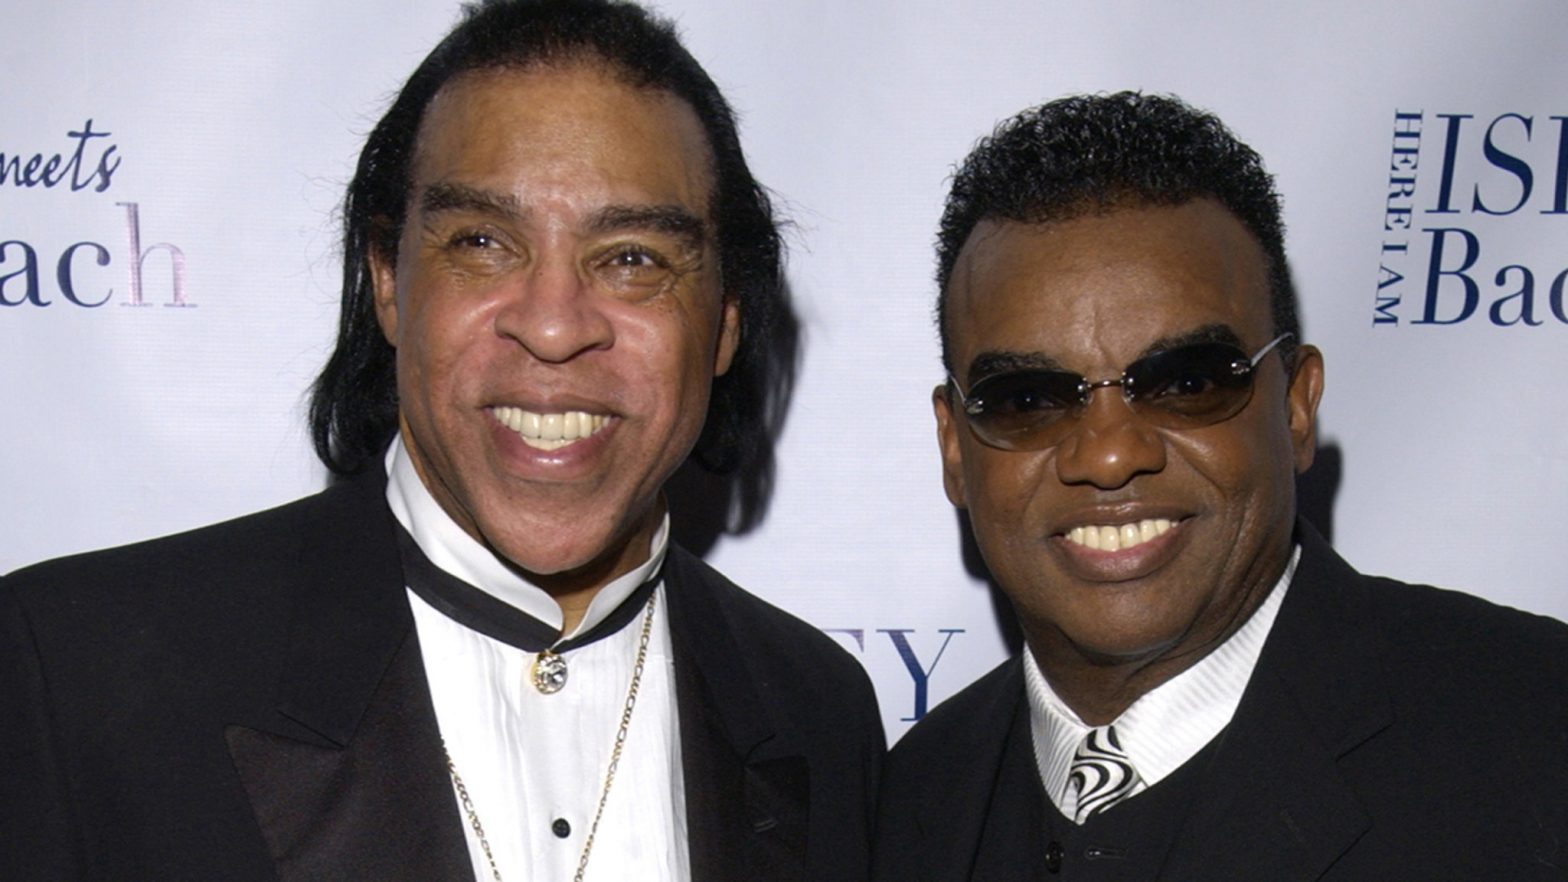 Why The Isley Brothers’ Rudolph Isley is suing brother Ronald Isley?